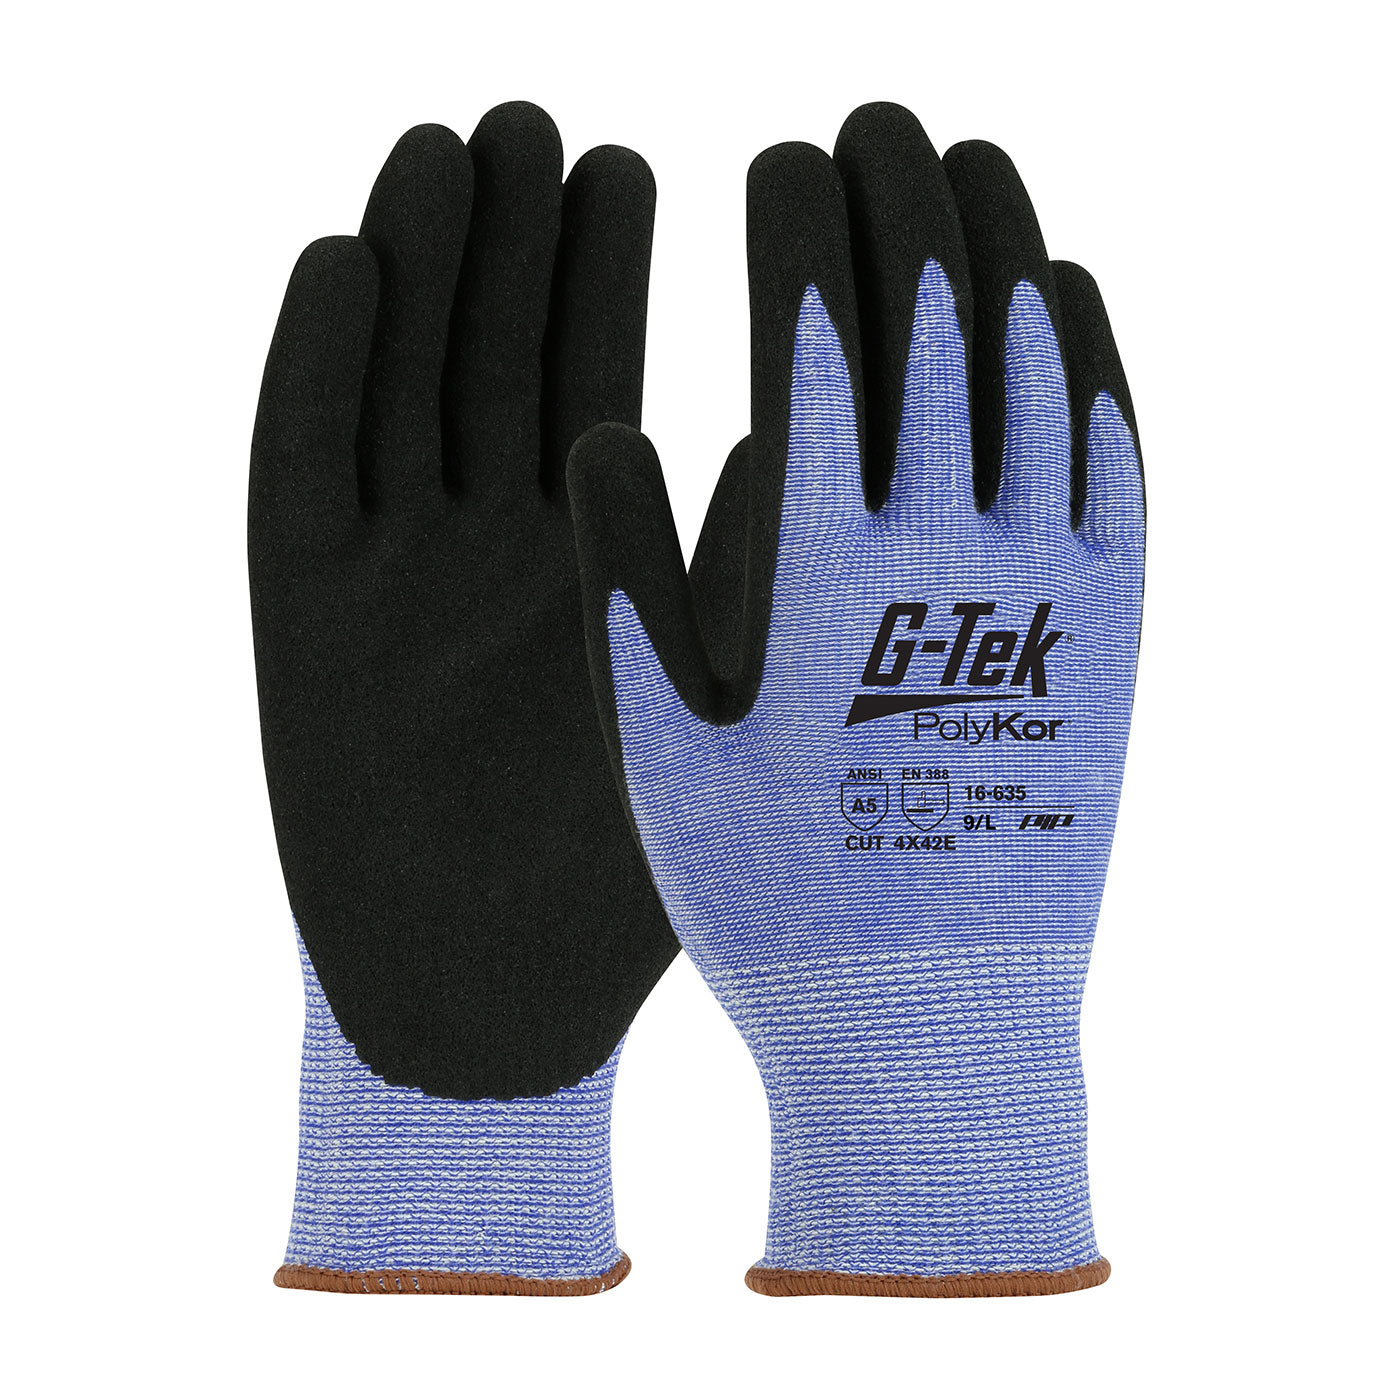 G-Tek® 16-635 Cut-Resistant PolyKor® Blended Glove with Black Nitrile Palm and Fingers (Cut Level 5) Work Gloves and Hats - Cleanflow